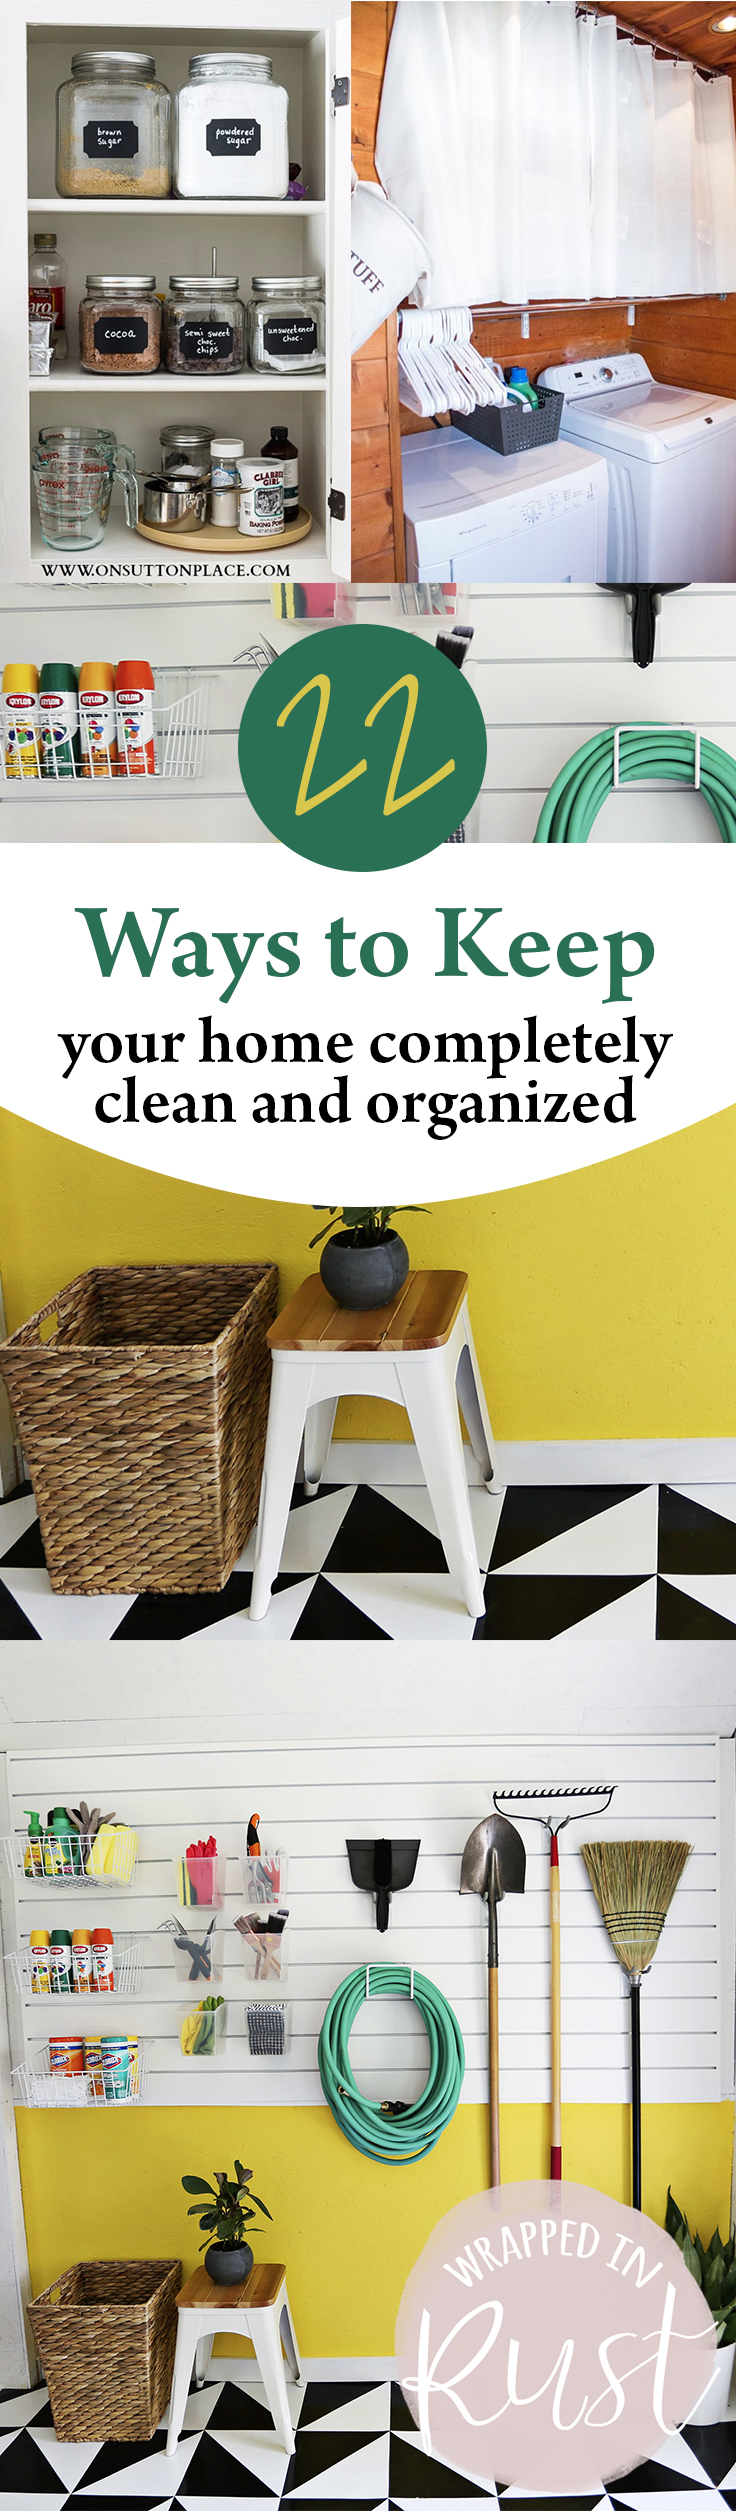 22 Ways to Keep Your Home Completely Clean and Organized - Page 9 of 23